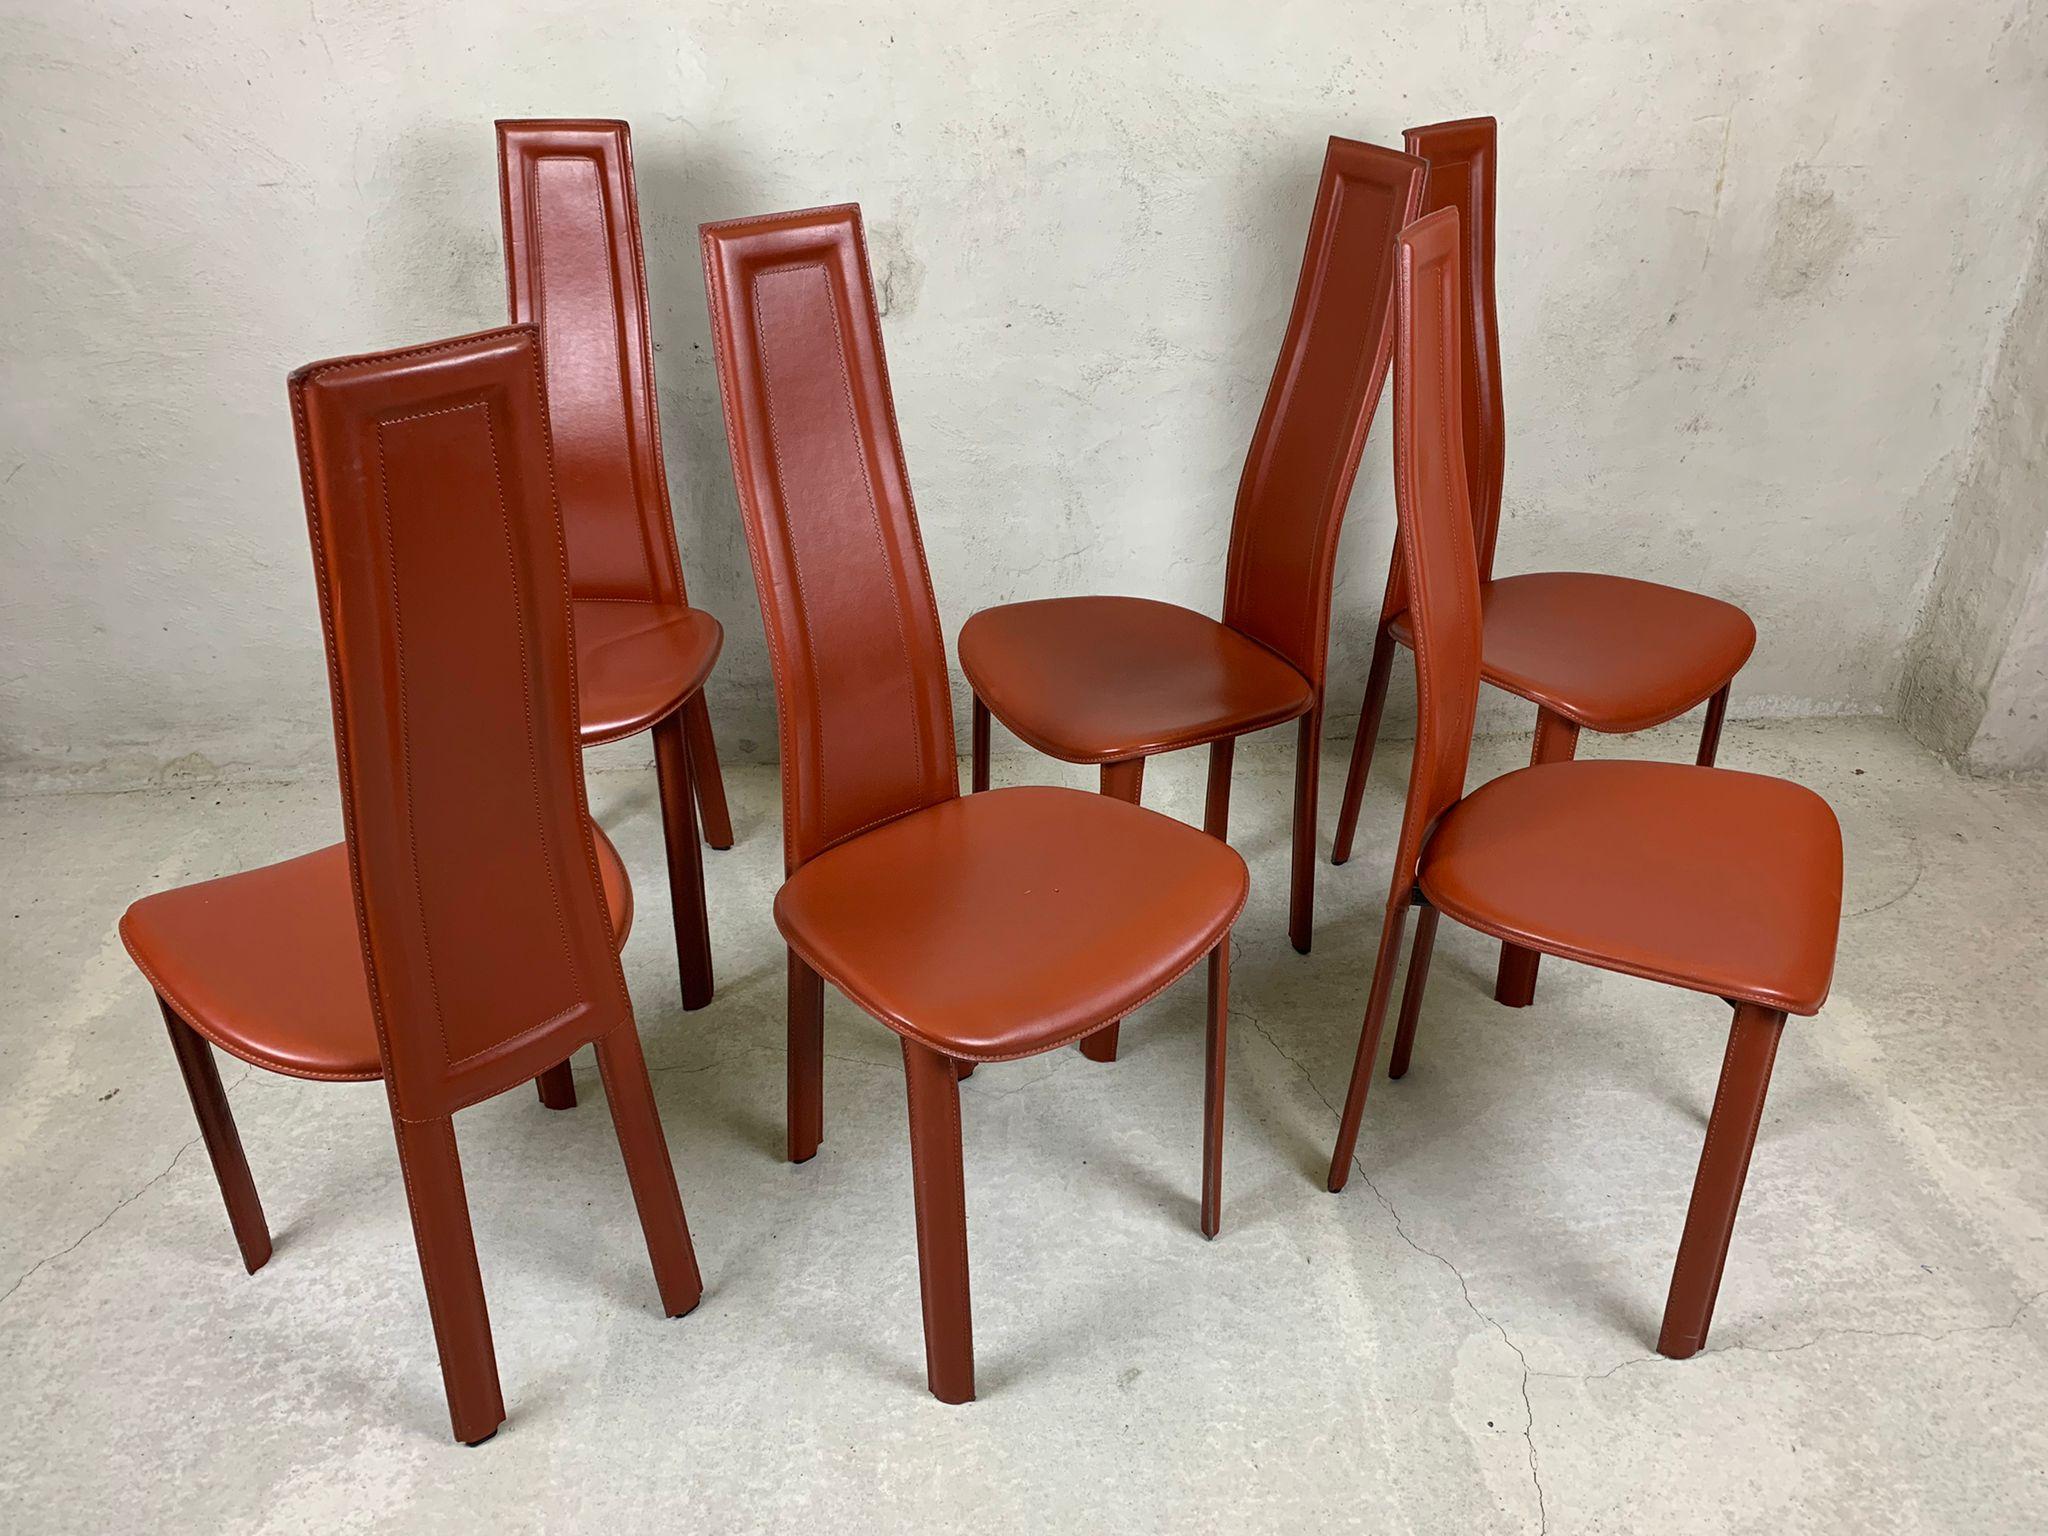 Set of 6 cognac leather high back dining chairs.

beautiful sleek and timeless design.

The chairs are in fair condition with minimal wear.

1980s - Italy

Dimensions
height: 110cm/43.30